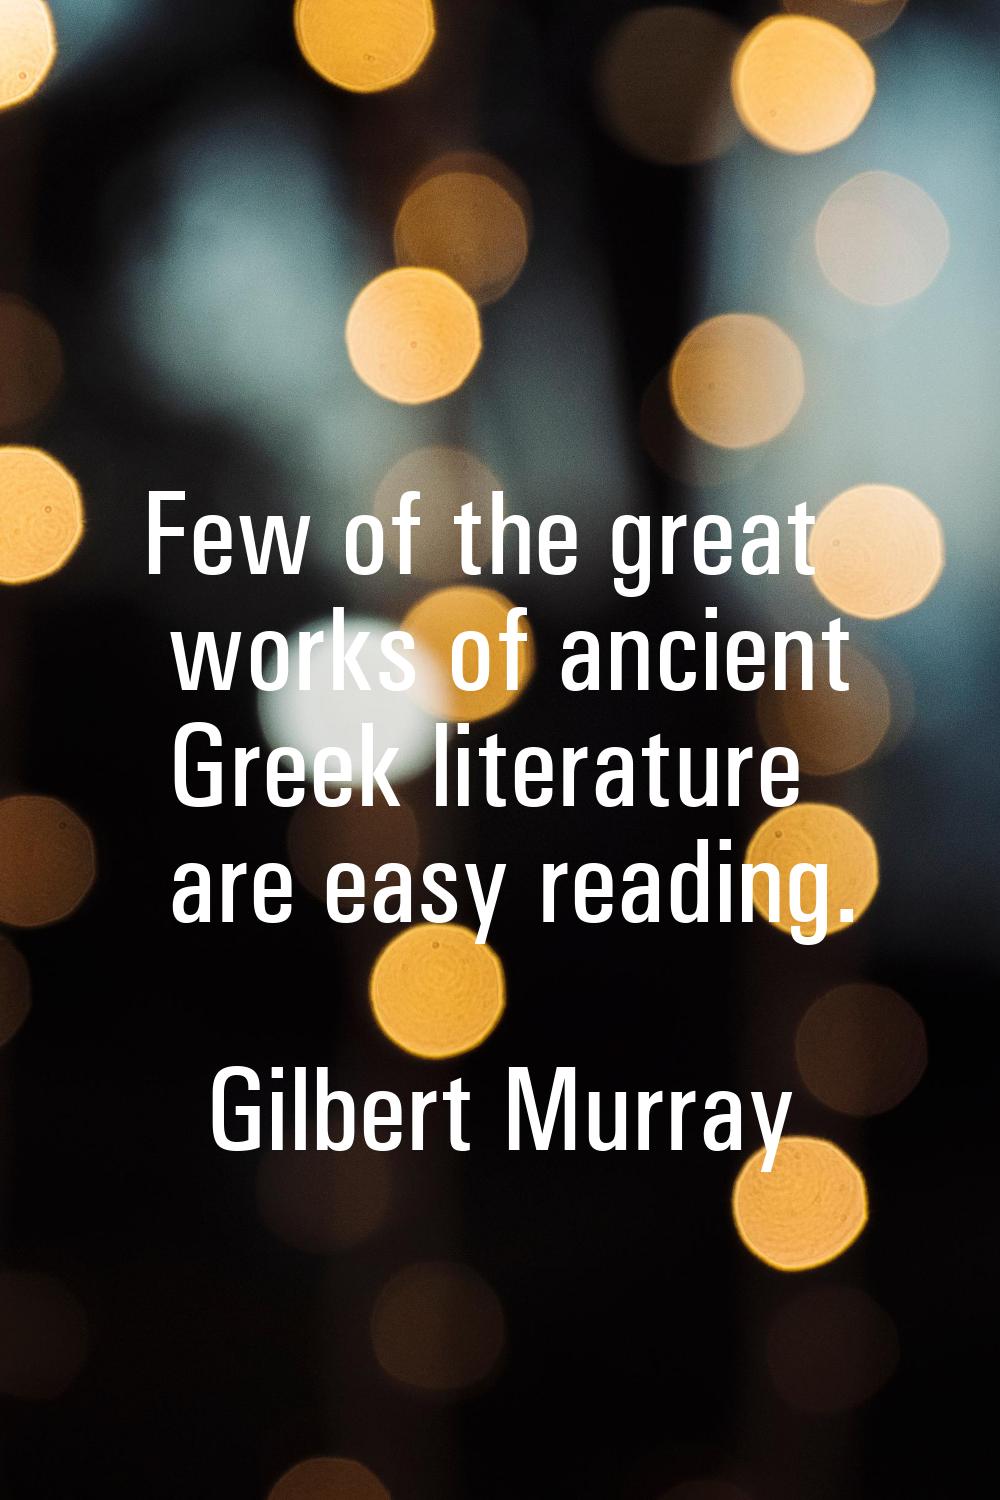 Few of the great works of ancient Greek literature are easy reading.